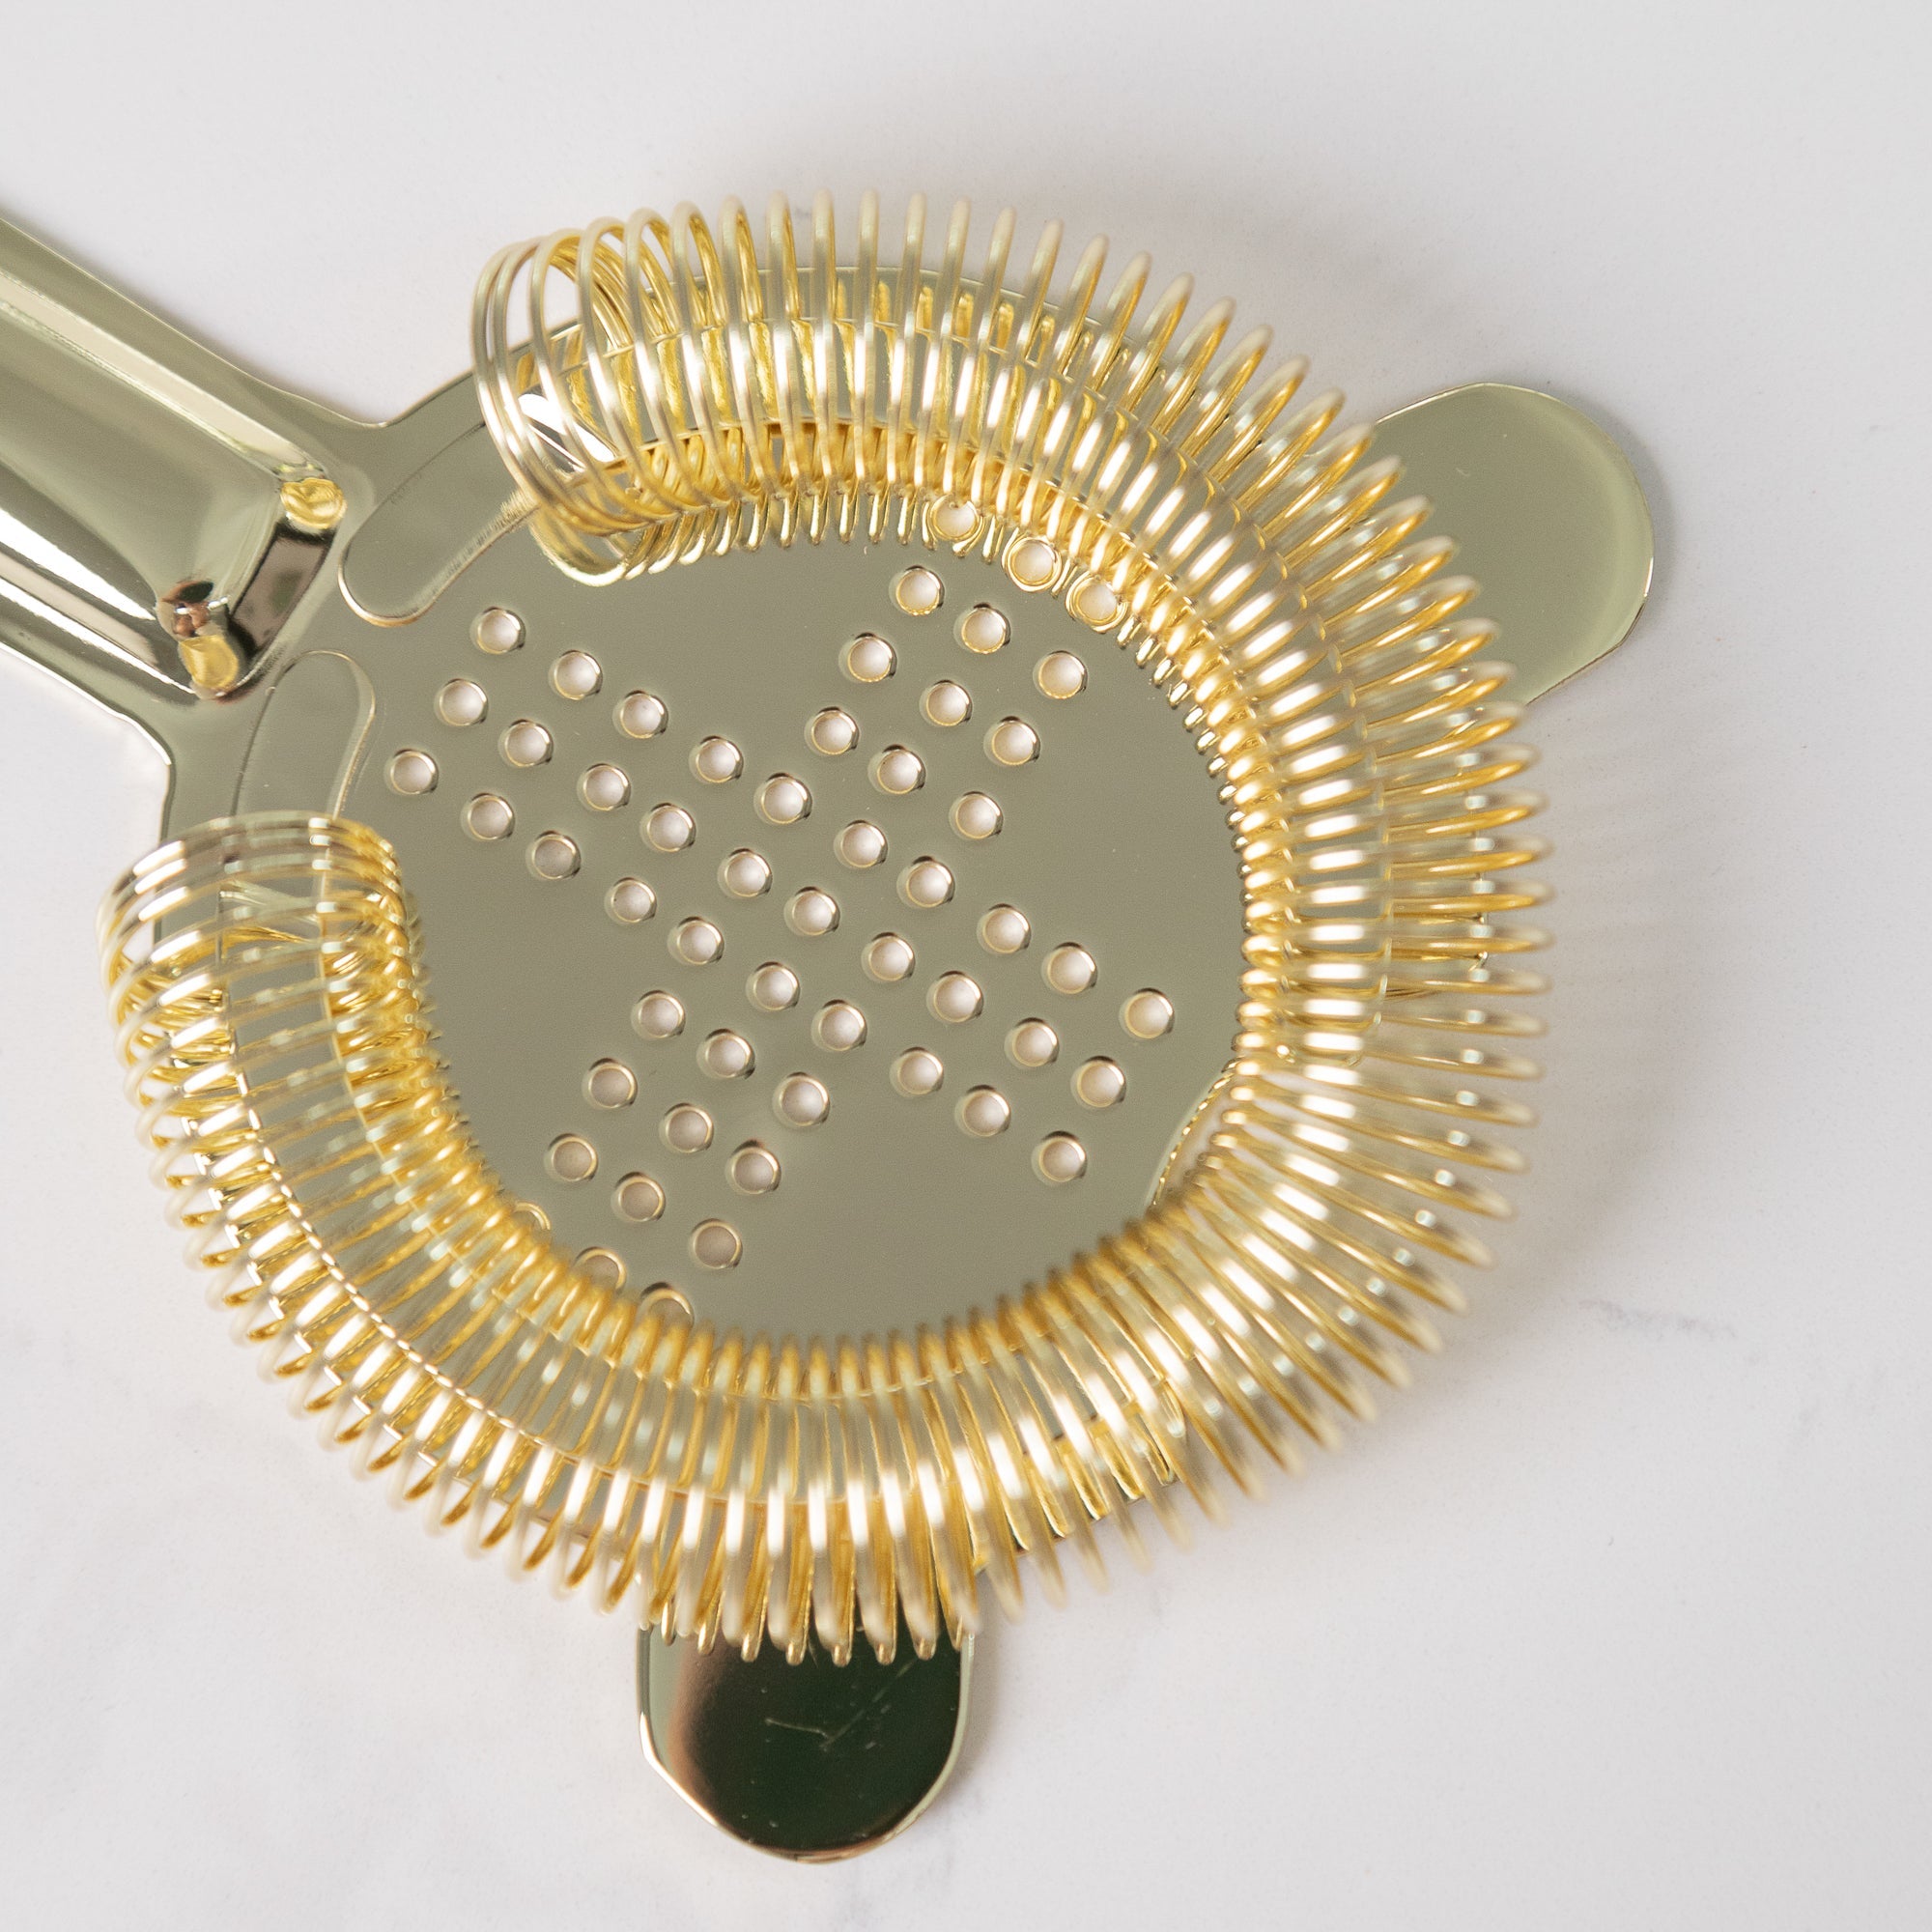 Hawthorn Baron Gold Cocktail Strainer Cocktail Strainers D-STILL Drinkware 